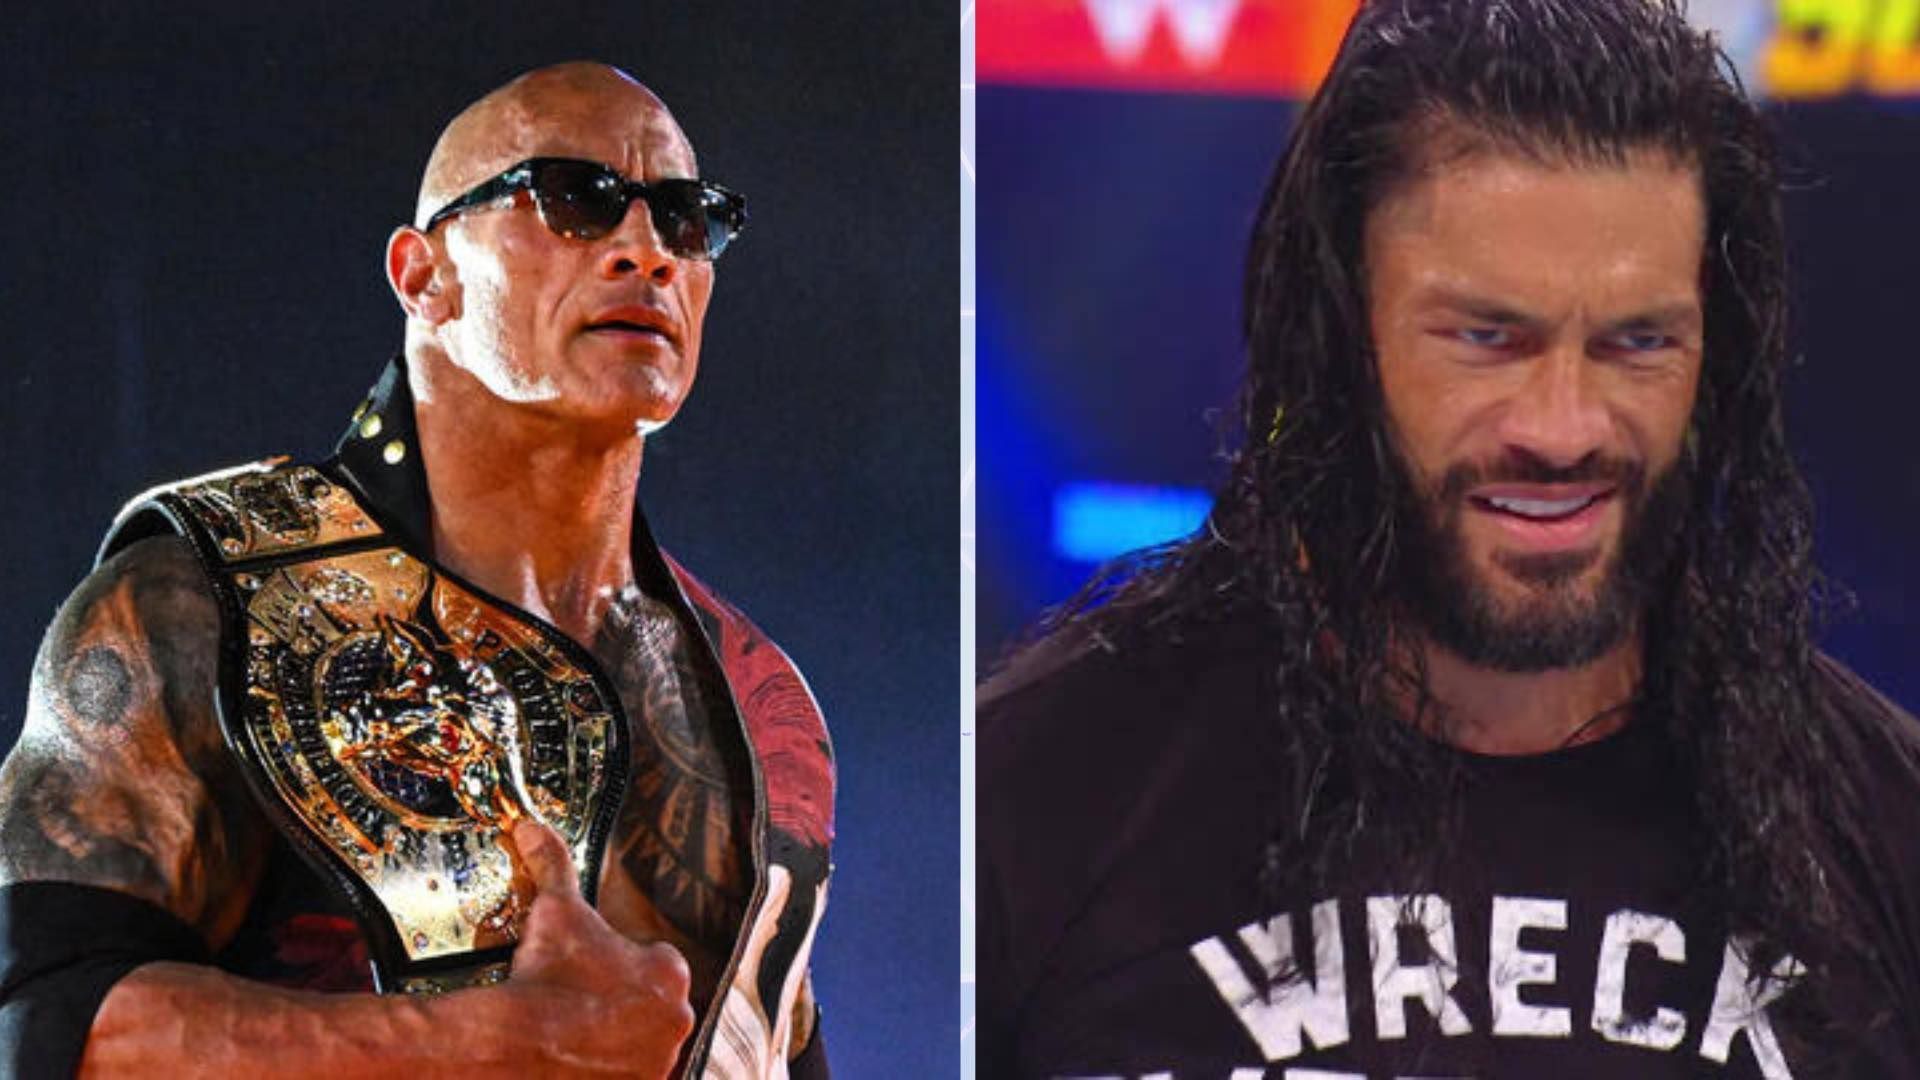 The Rock is rumored to appear on WWE SmackDown [Credit: WWE.com]